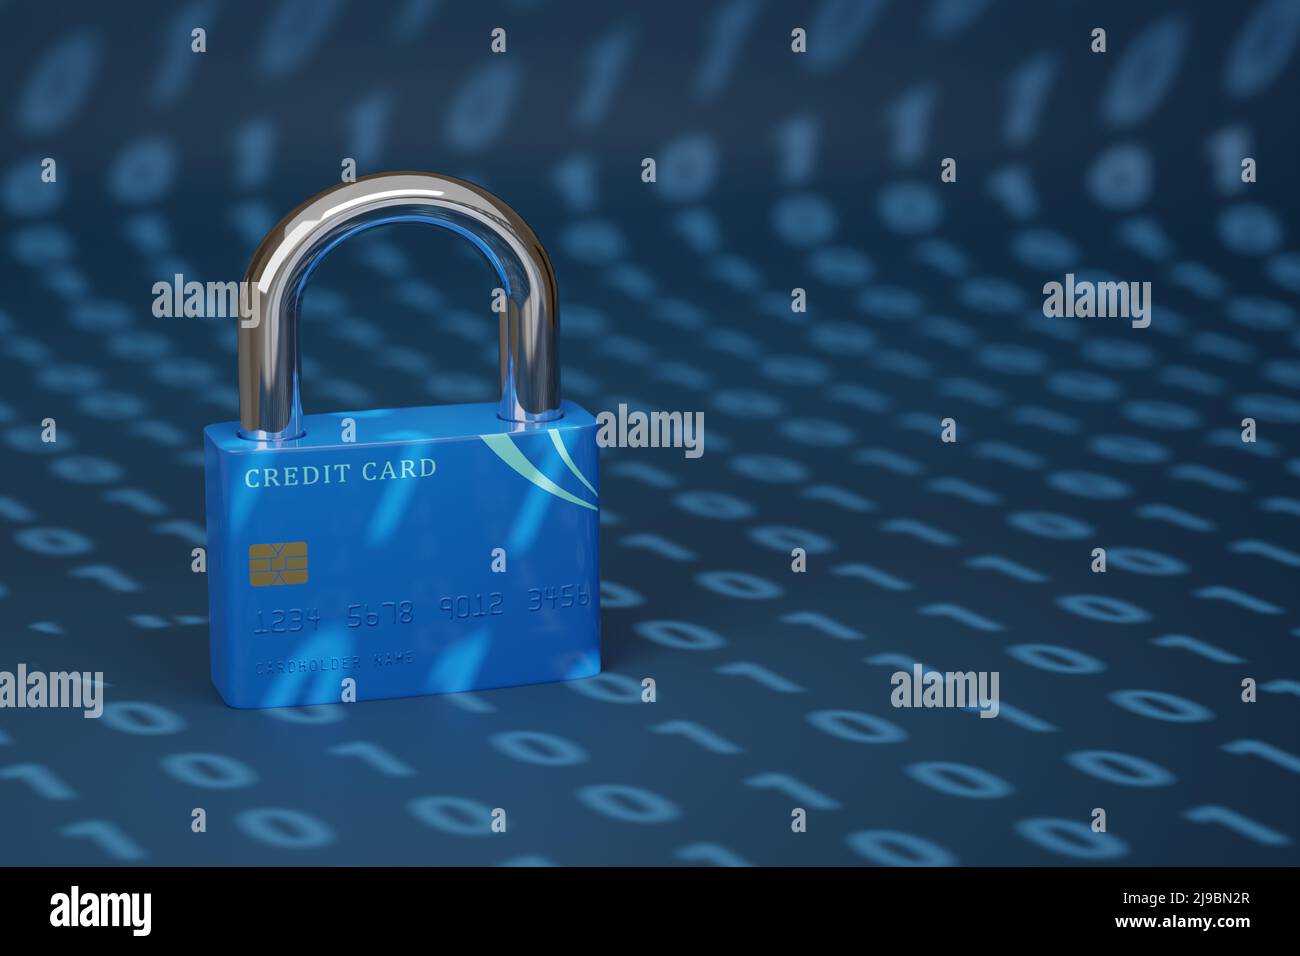 Credit card in the shape of a closed padlock on a background of binary code with copy space. Computer security concept. 3d illustration. Stock Photo